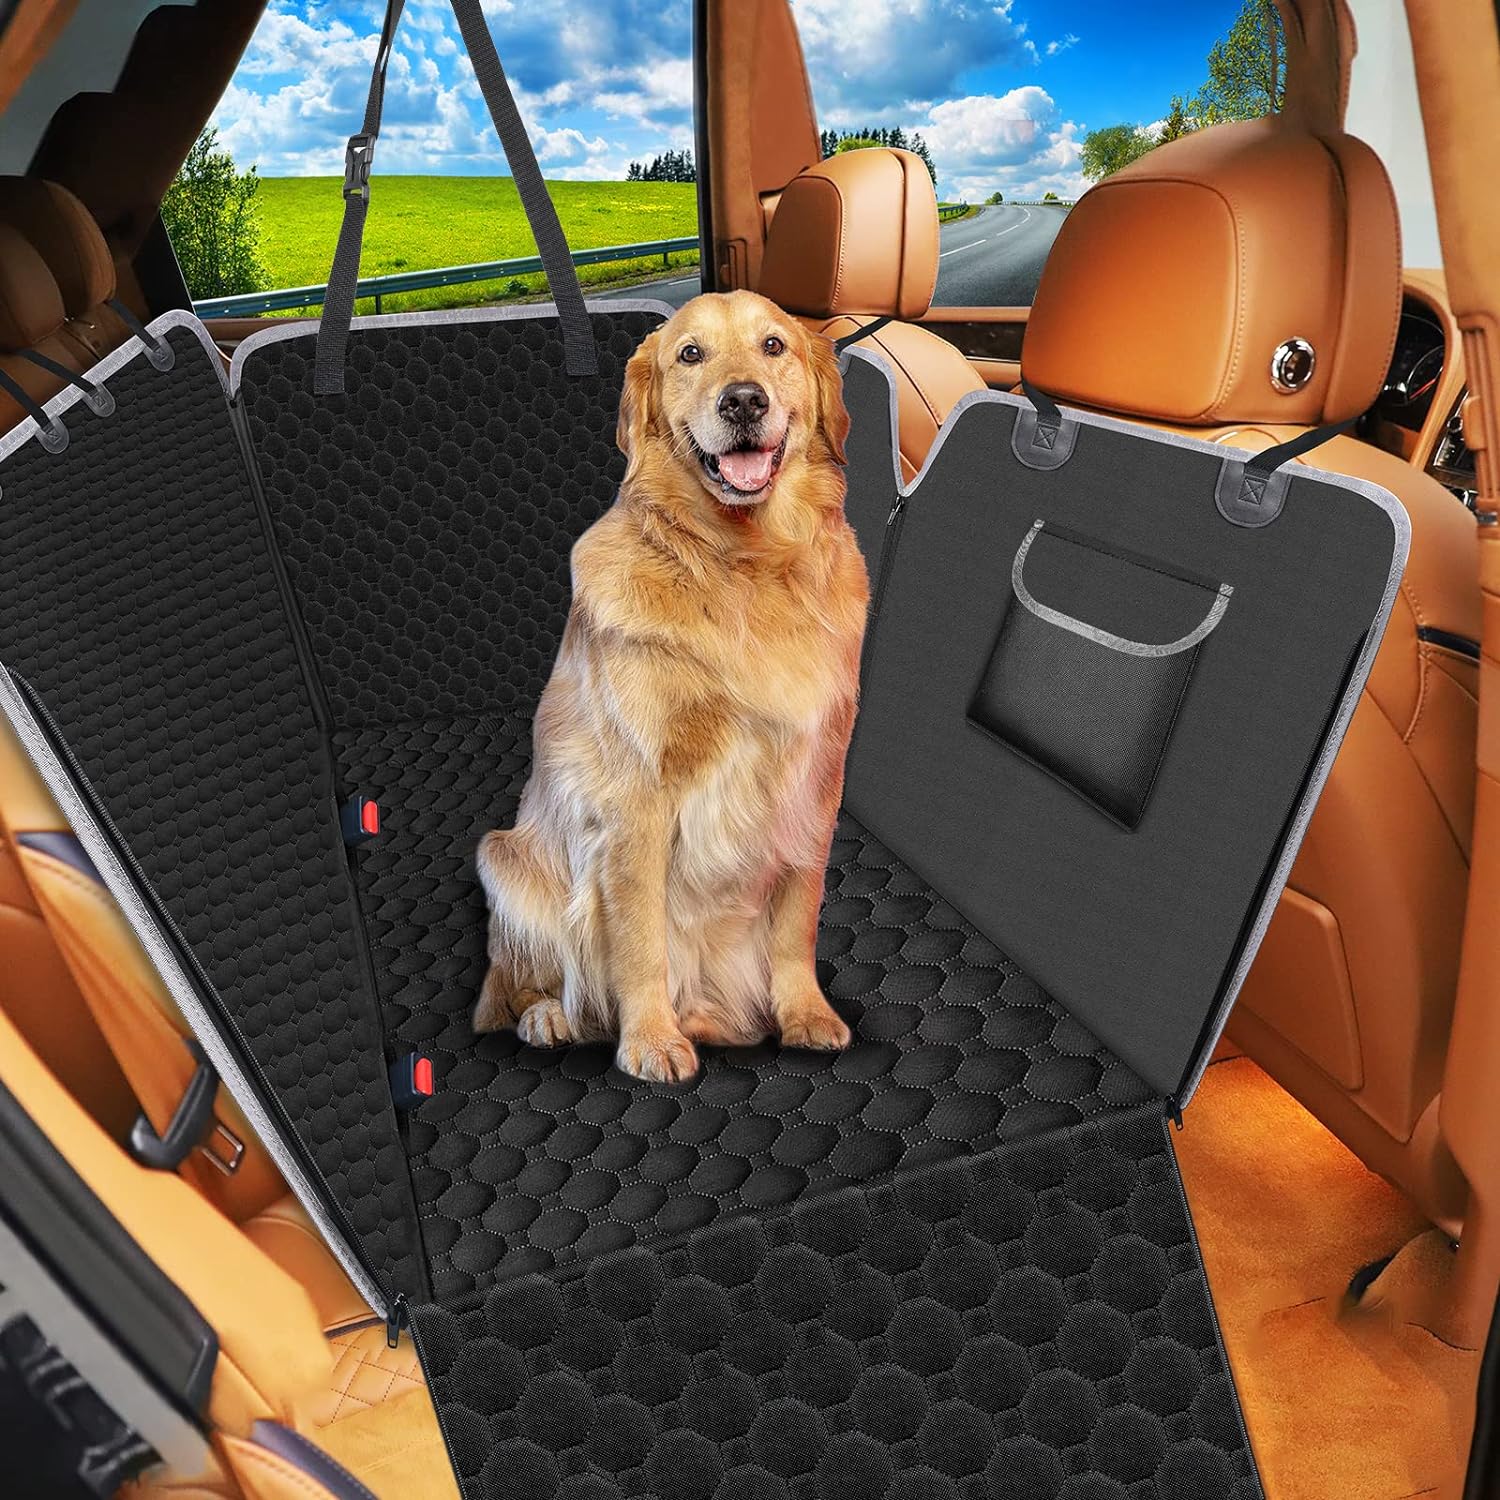 We weren't sure what we wanted so we tried this inexpensive model, and it is perfect for what we needed. Sturdy and well made. Worked well for a large dog, it made a hammock style enclosure in the back seat so the dog doesn't fall on the floor at a quick stop and he can lay in either direction. Quick and easy to install but would have preferred the side clips over the doors were buckles like the other straps, as they are stiff and hard to snap. Zippers make it easy to get the dog secured or to u